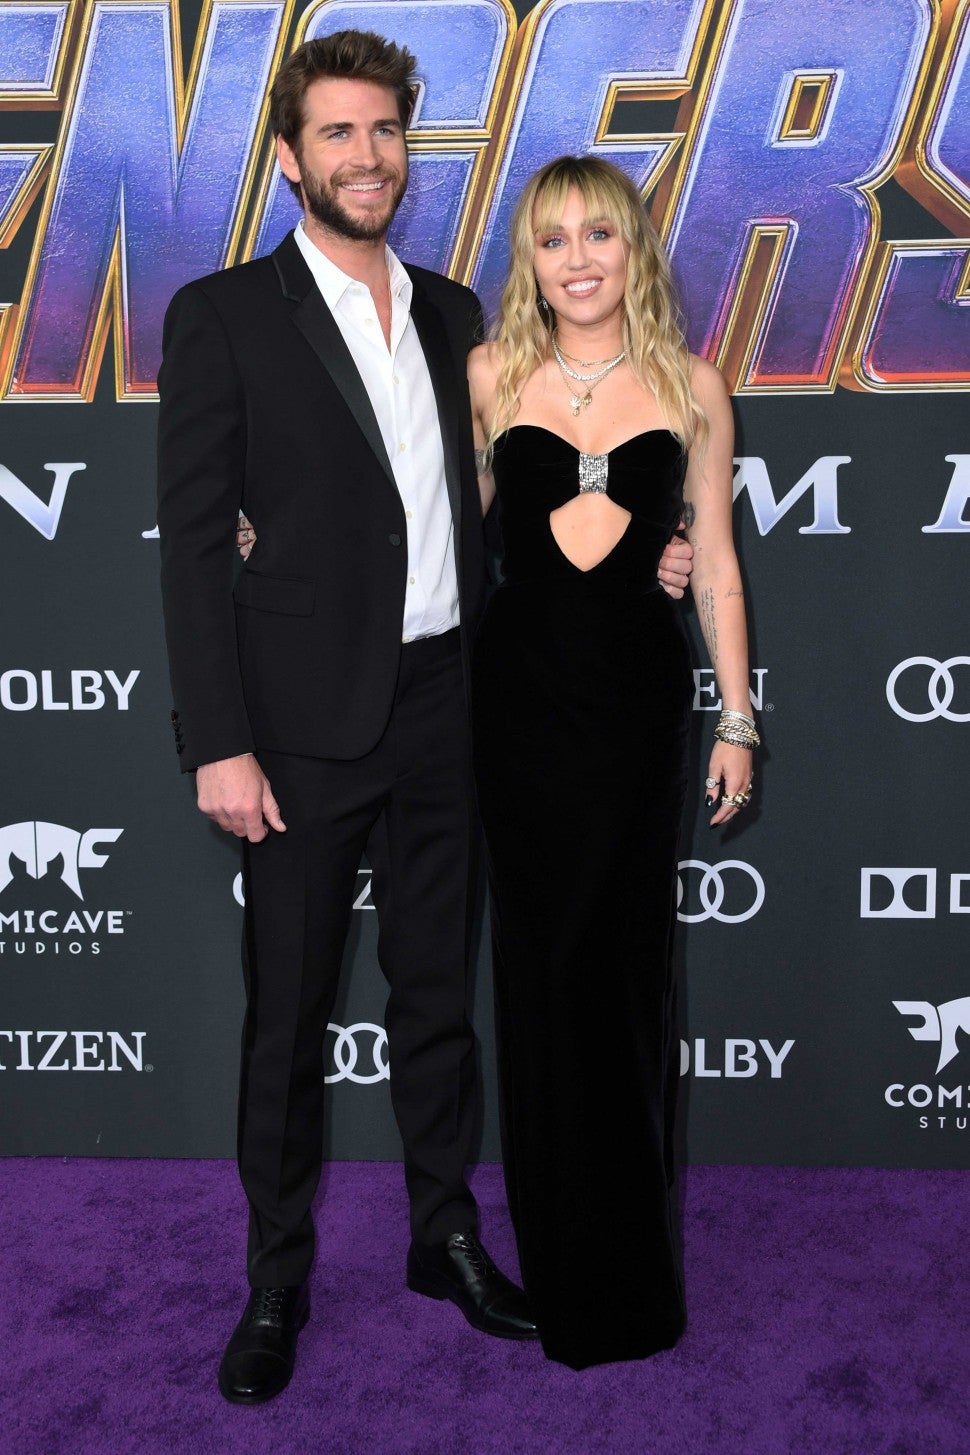 Liam Hemsworth and Miley Cyrus at the 'Avengers: Endgame' premiere in L.A. on April 22.